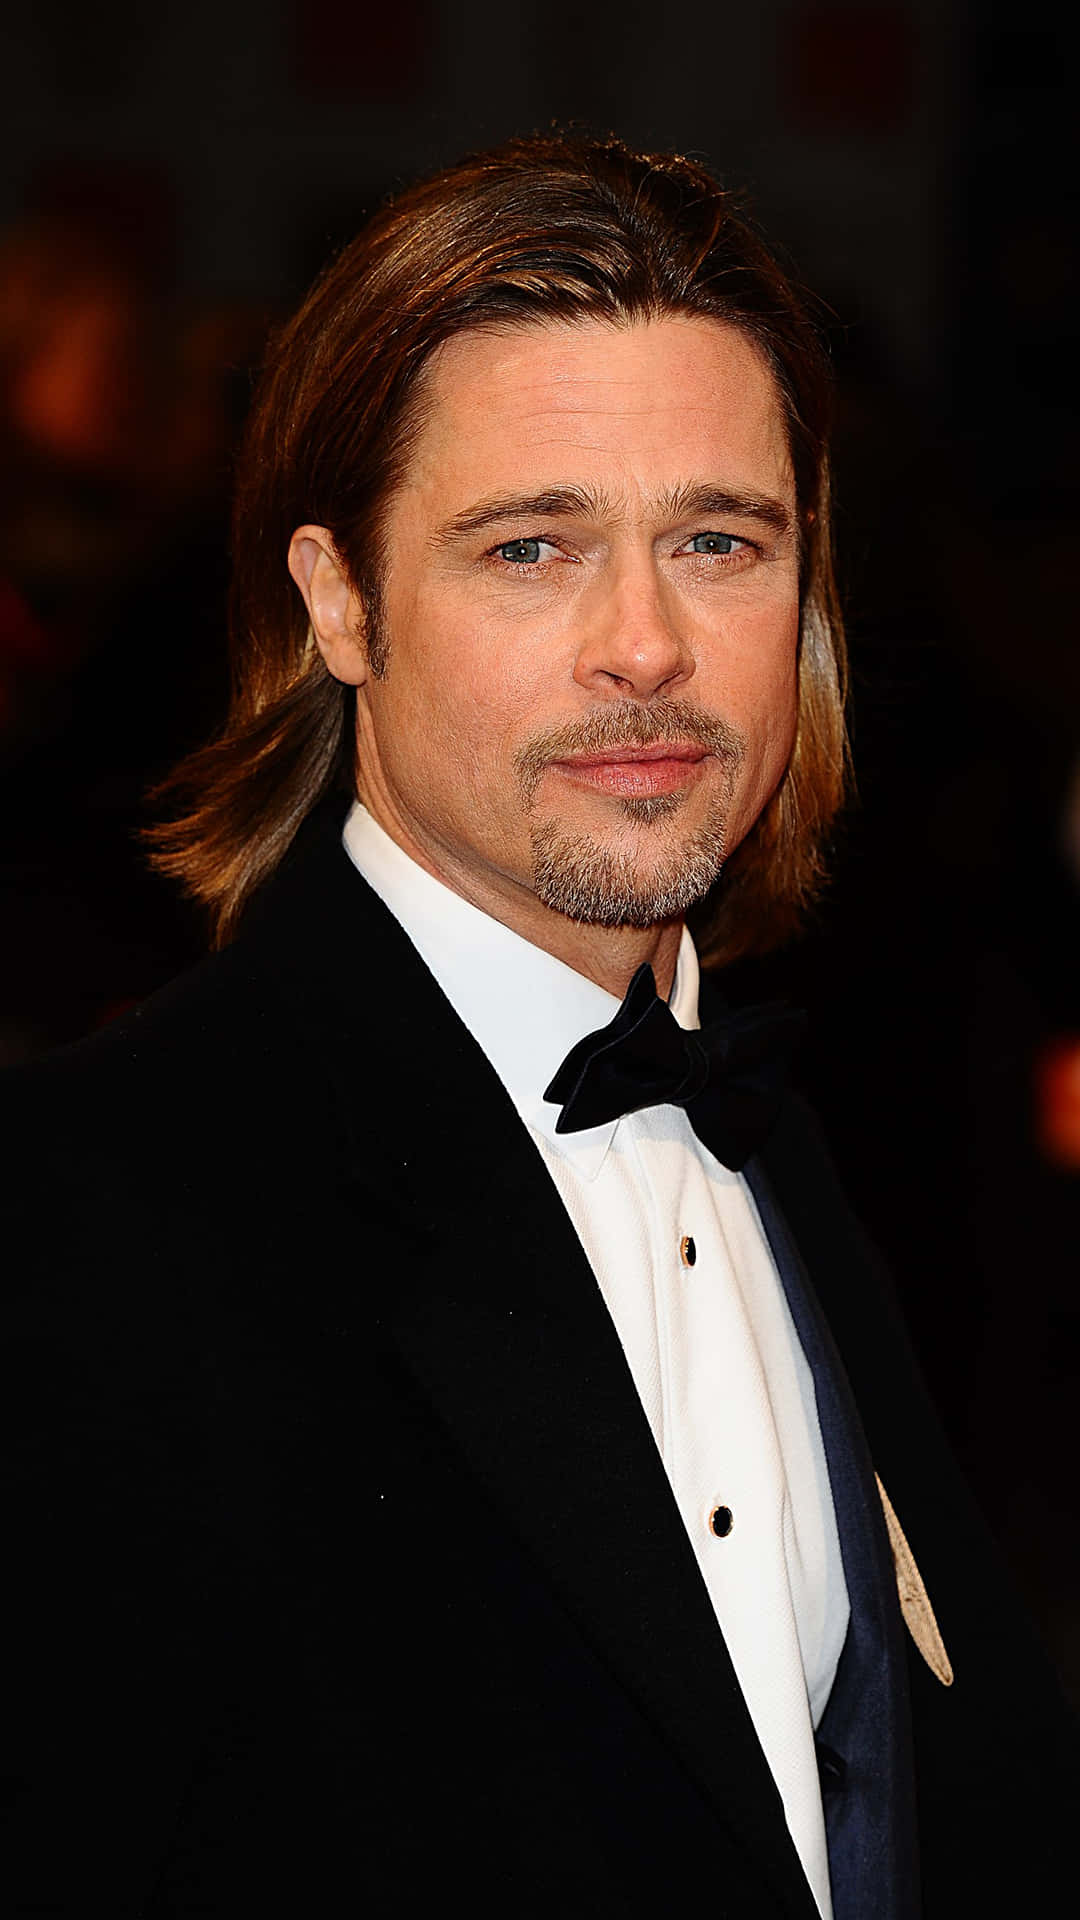 Hollywood star Brad Pitt in his classic pose